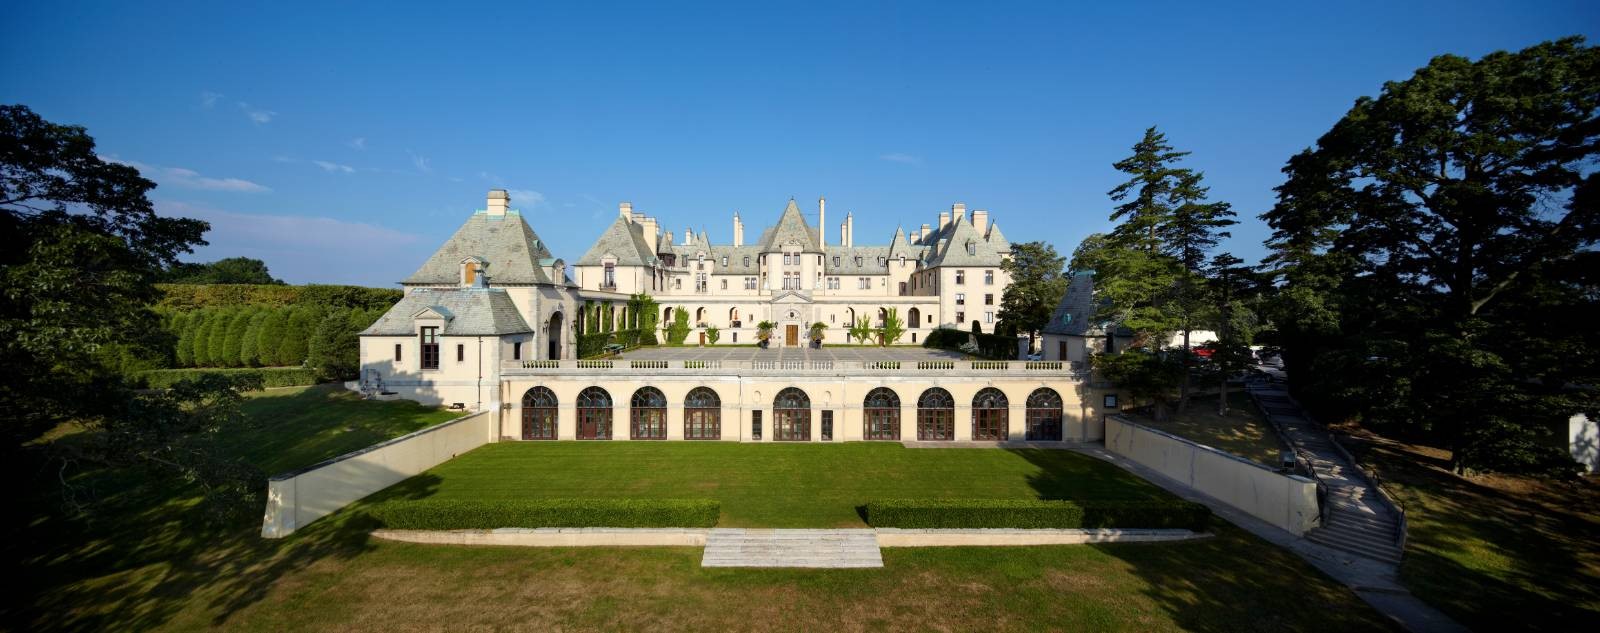 30 Biggest Houses In The World-Oheka Castle, New York, USA - Sheet3